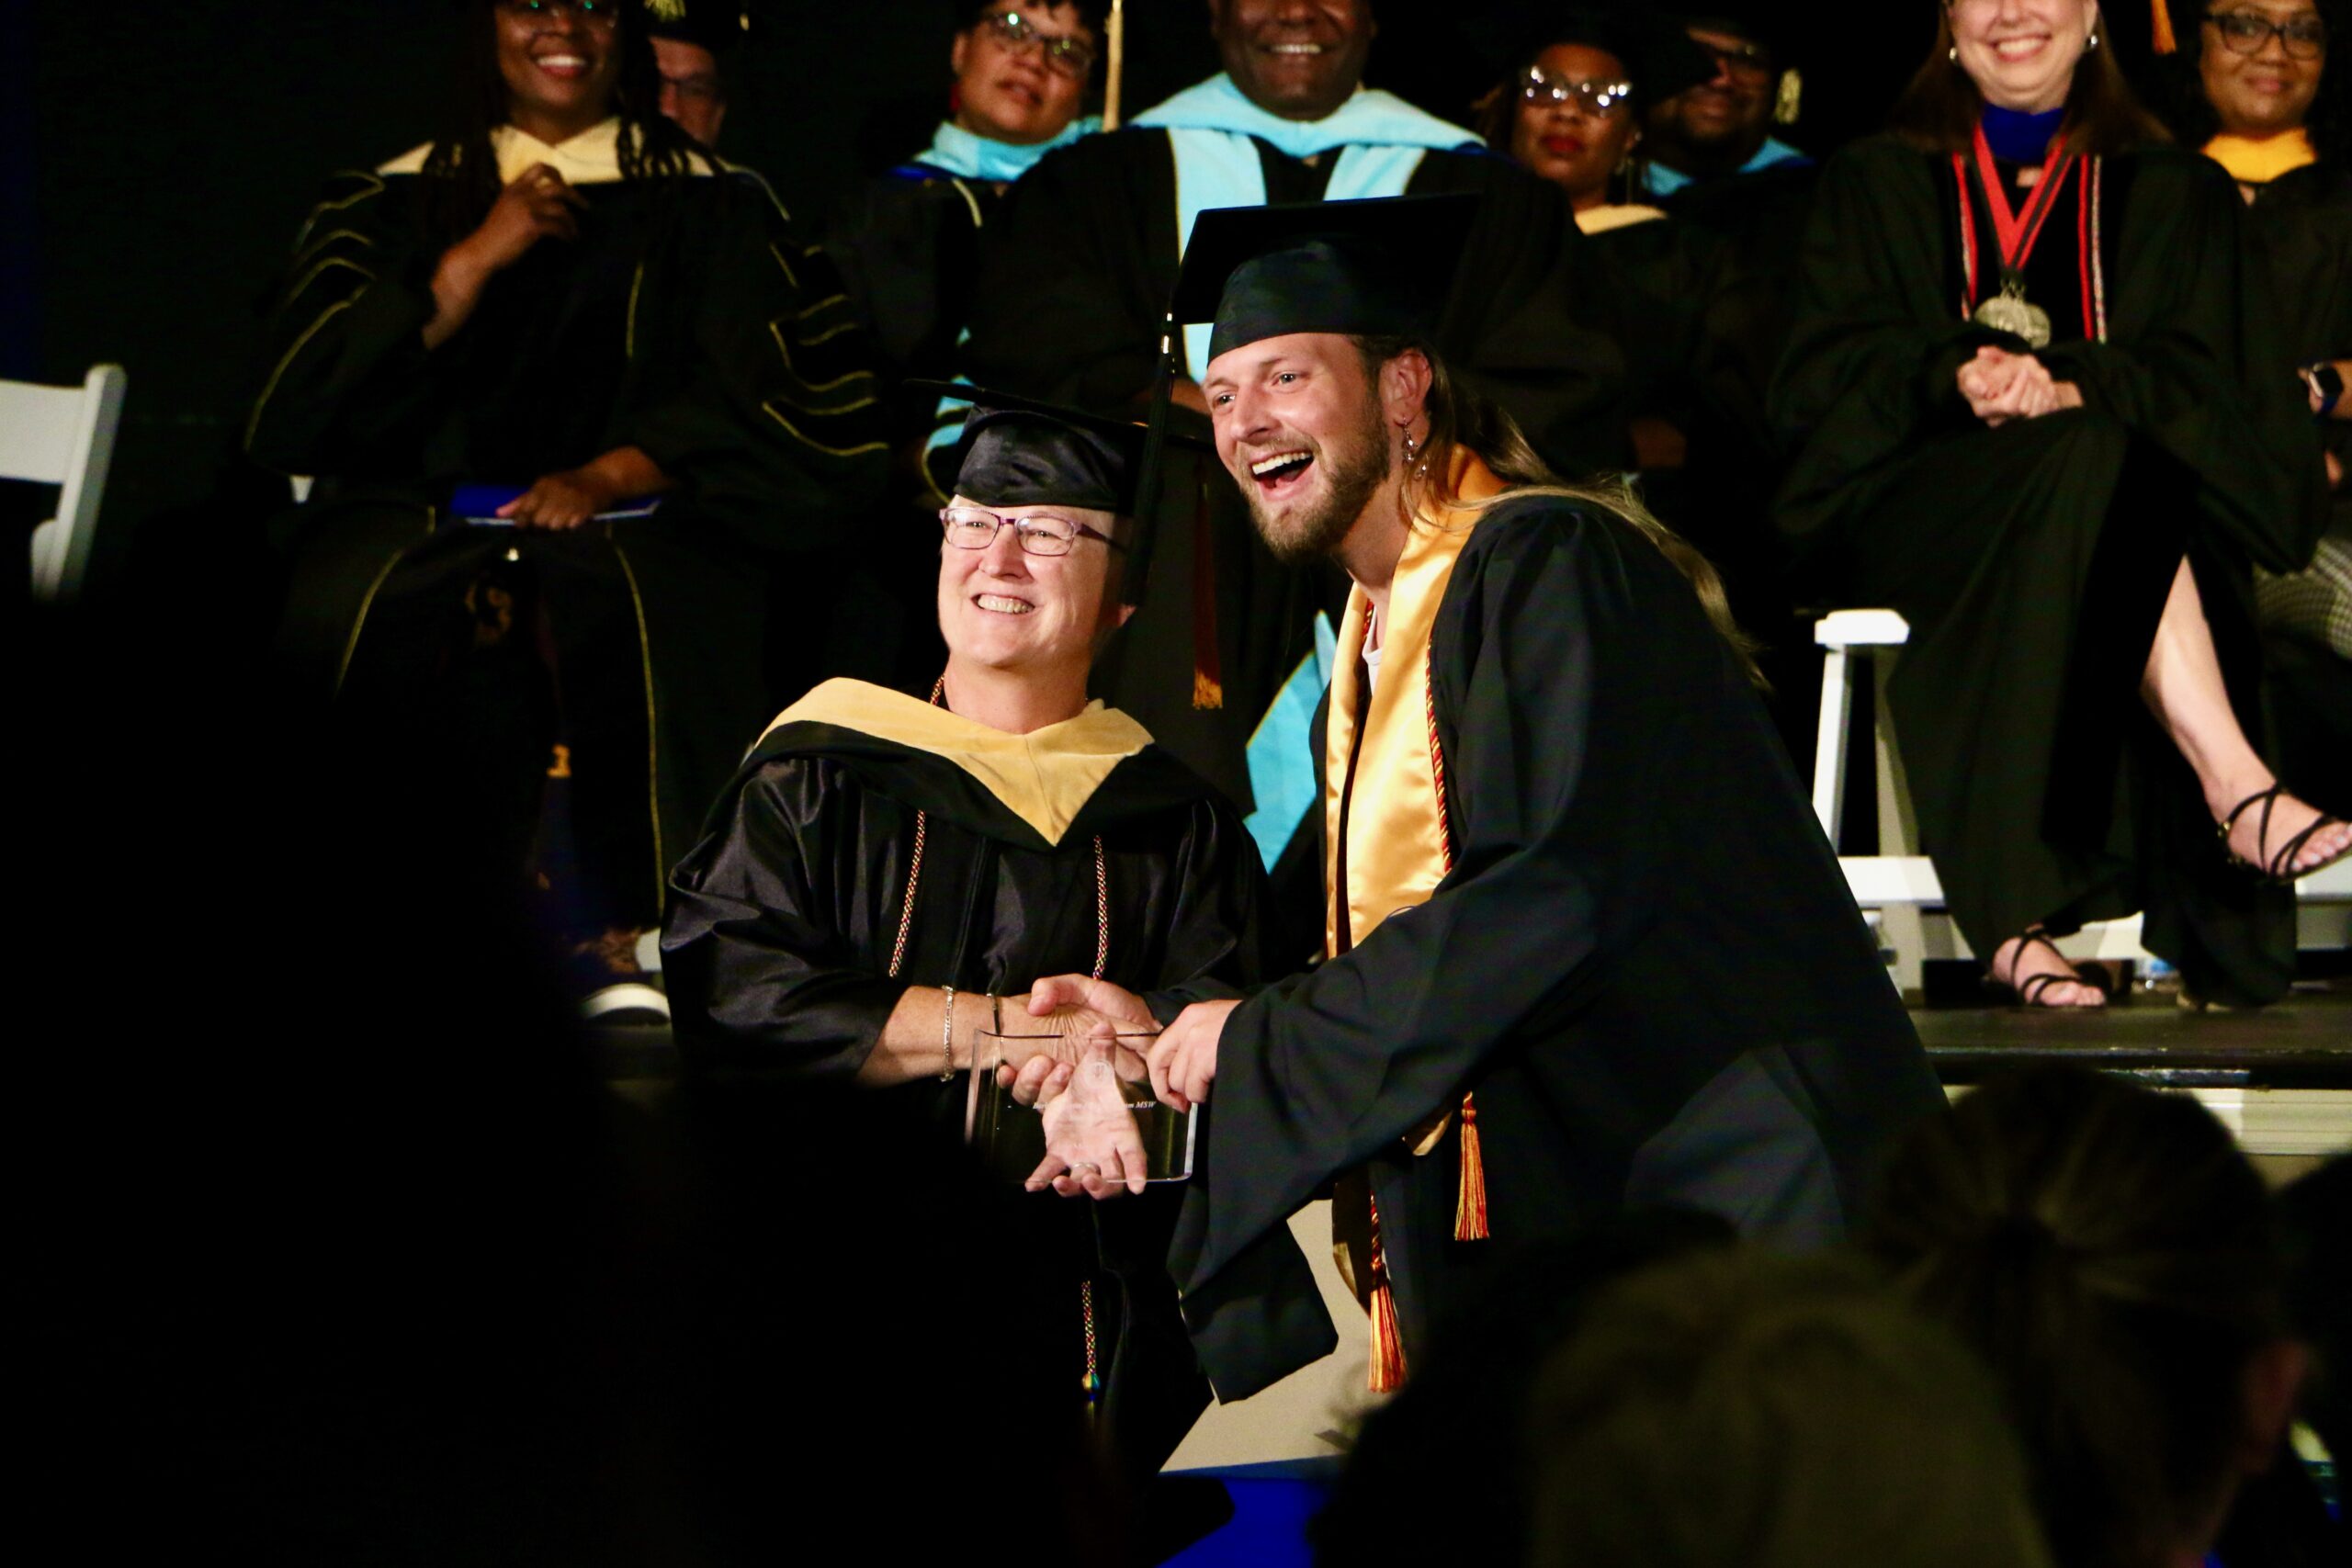 Spalding master's graduate shaking hands and receiving award from faculty